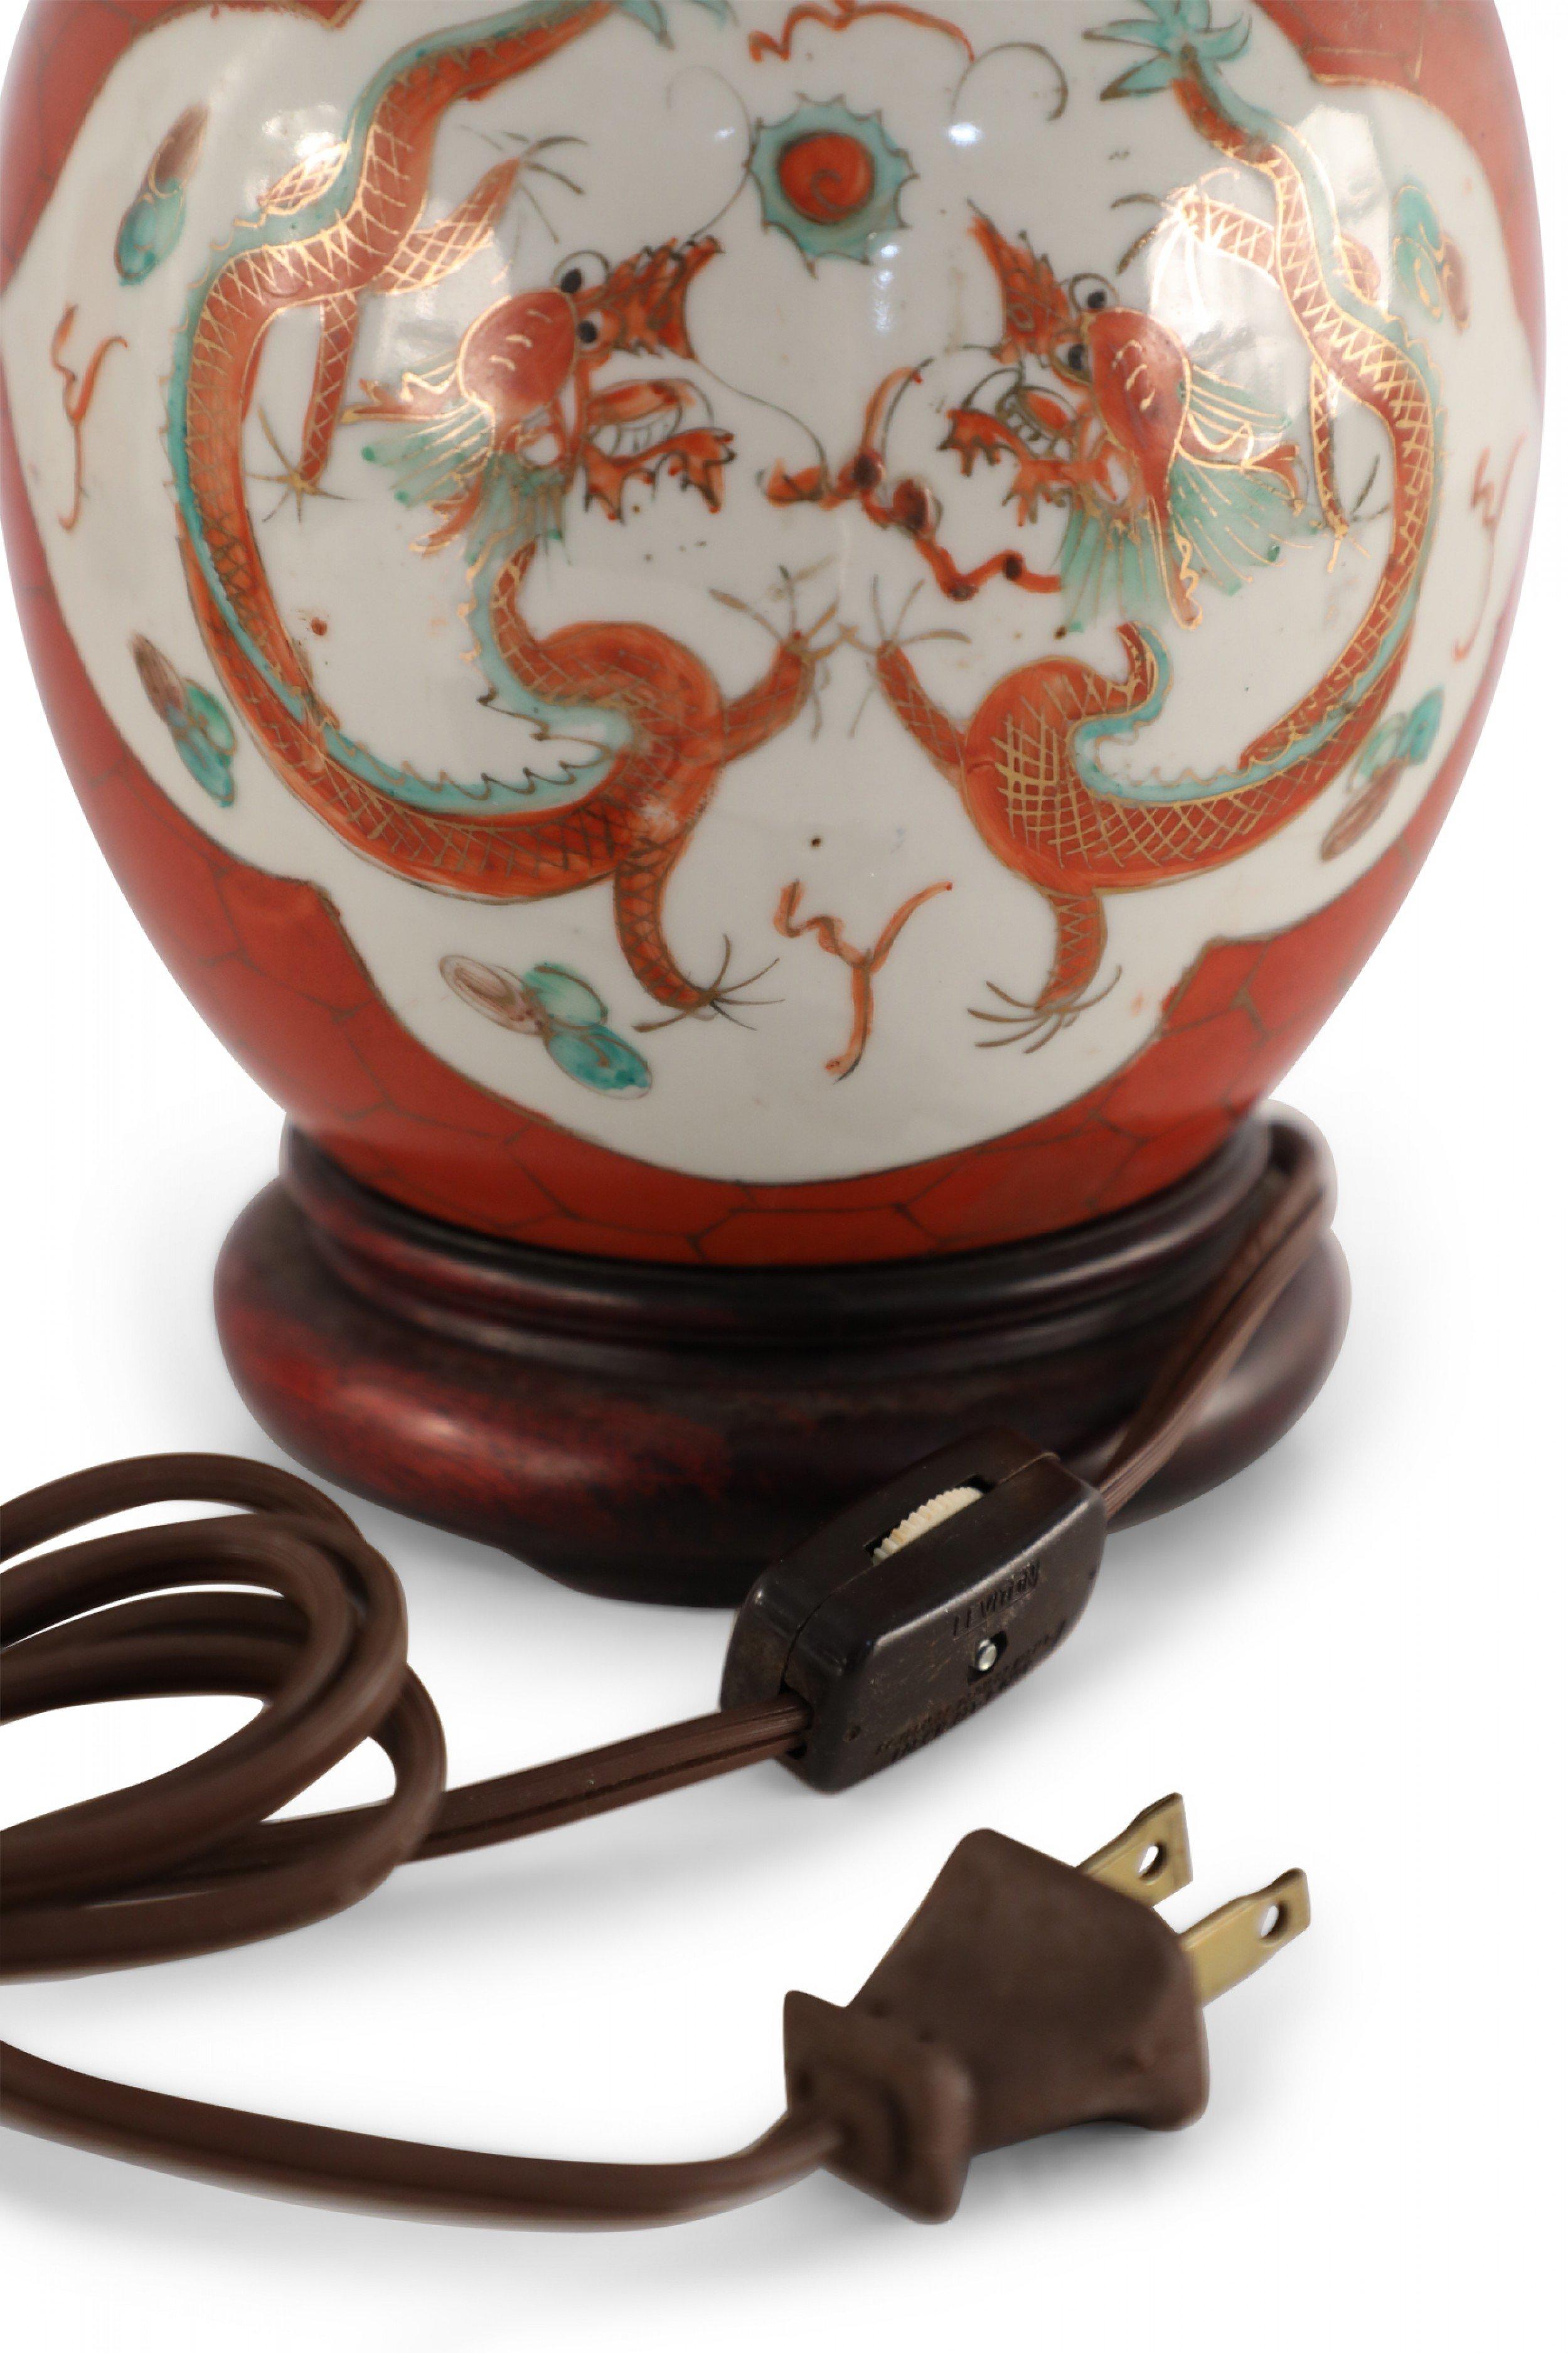 Antique Chinese (Early 20th Century) table lamp made from a round, luster porcelain vase with an orange and gold hexagonal patterned ground against two white cartouches depicting dragons, mounted on a wooden base with brass hardware.
 